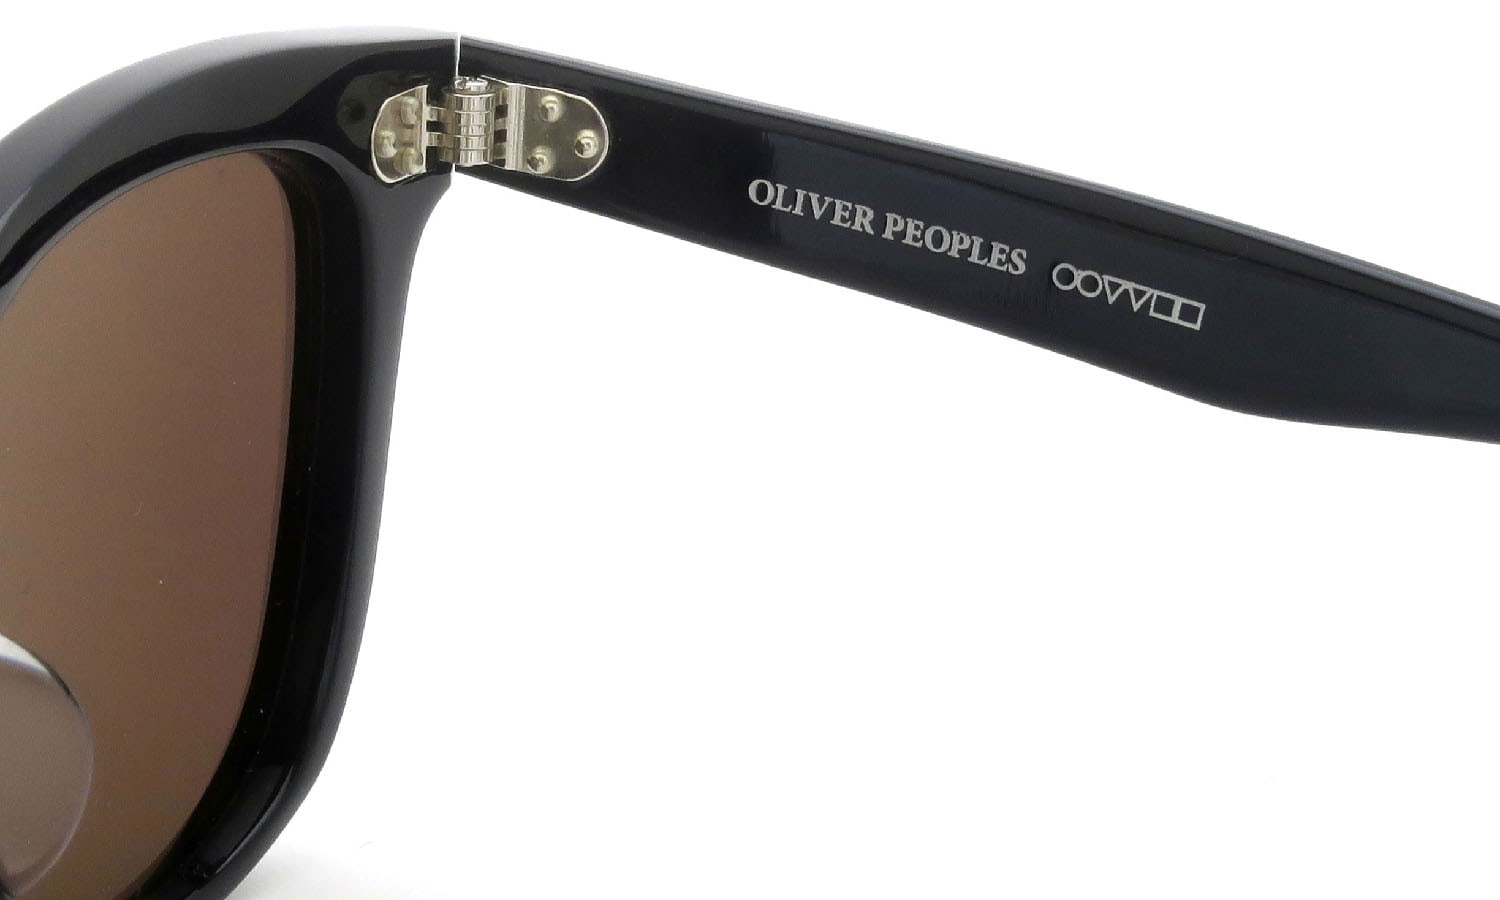 OLIVER PEOPLES archive サングラス Lurene通販 BK 生産：オプテックジャパン期) #001 ポンメガネ